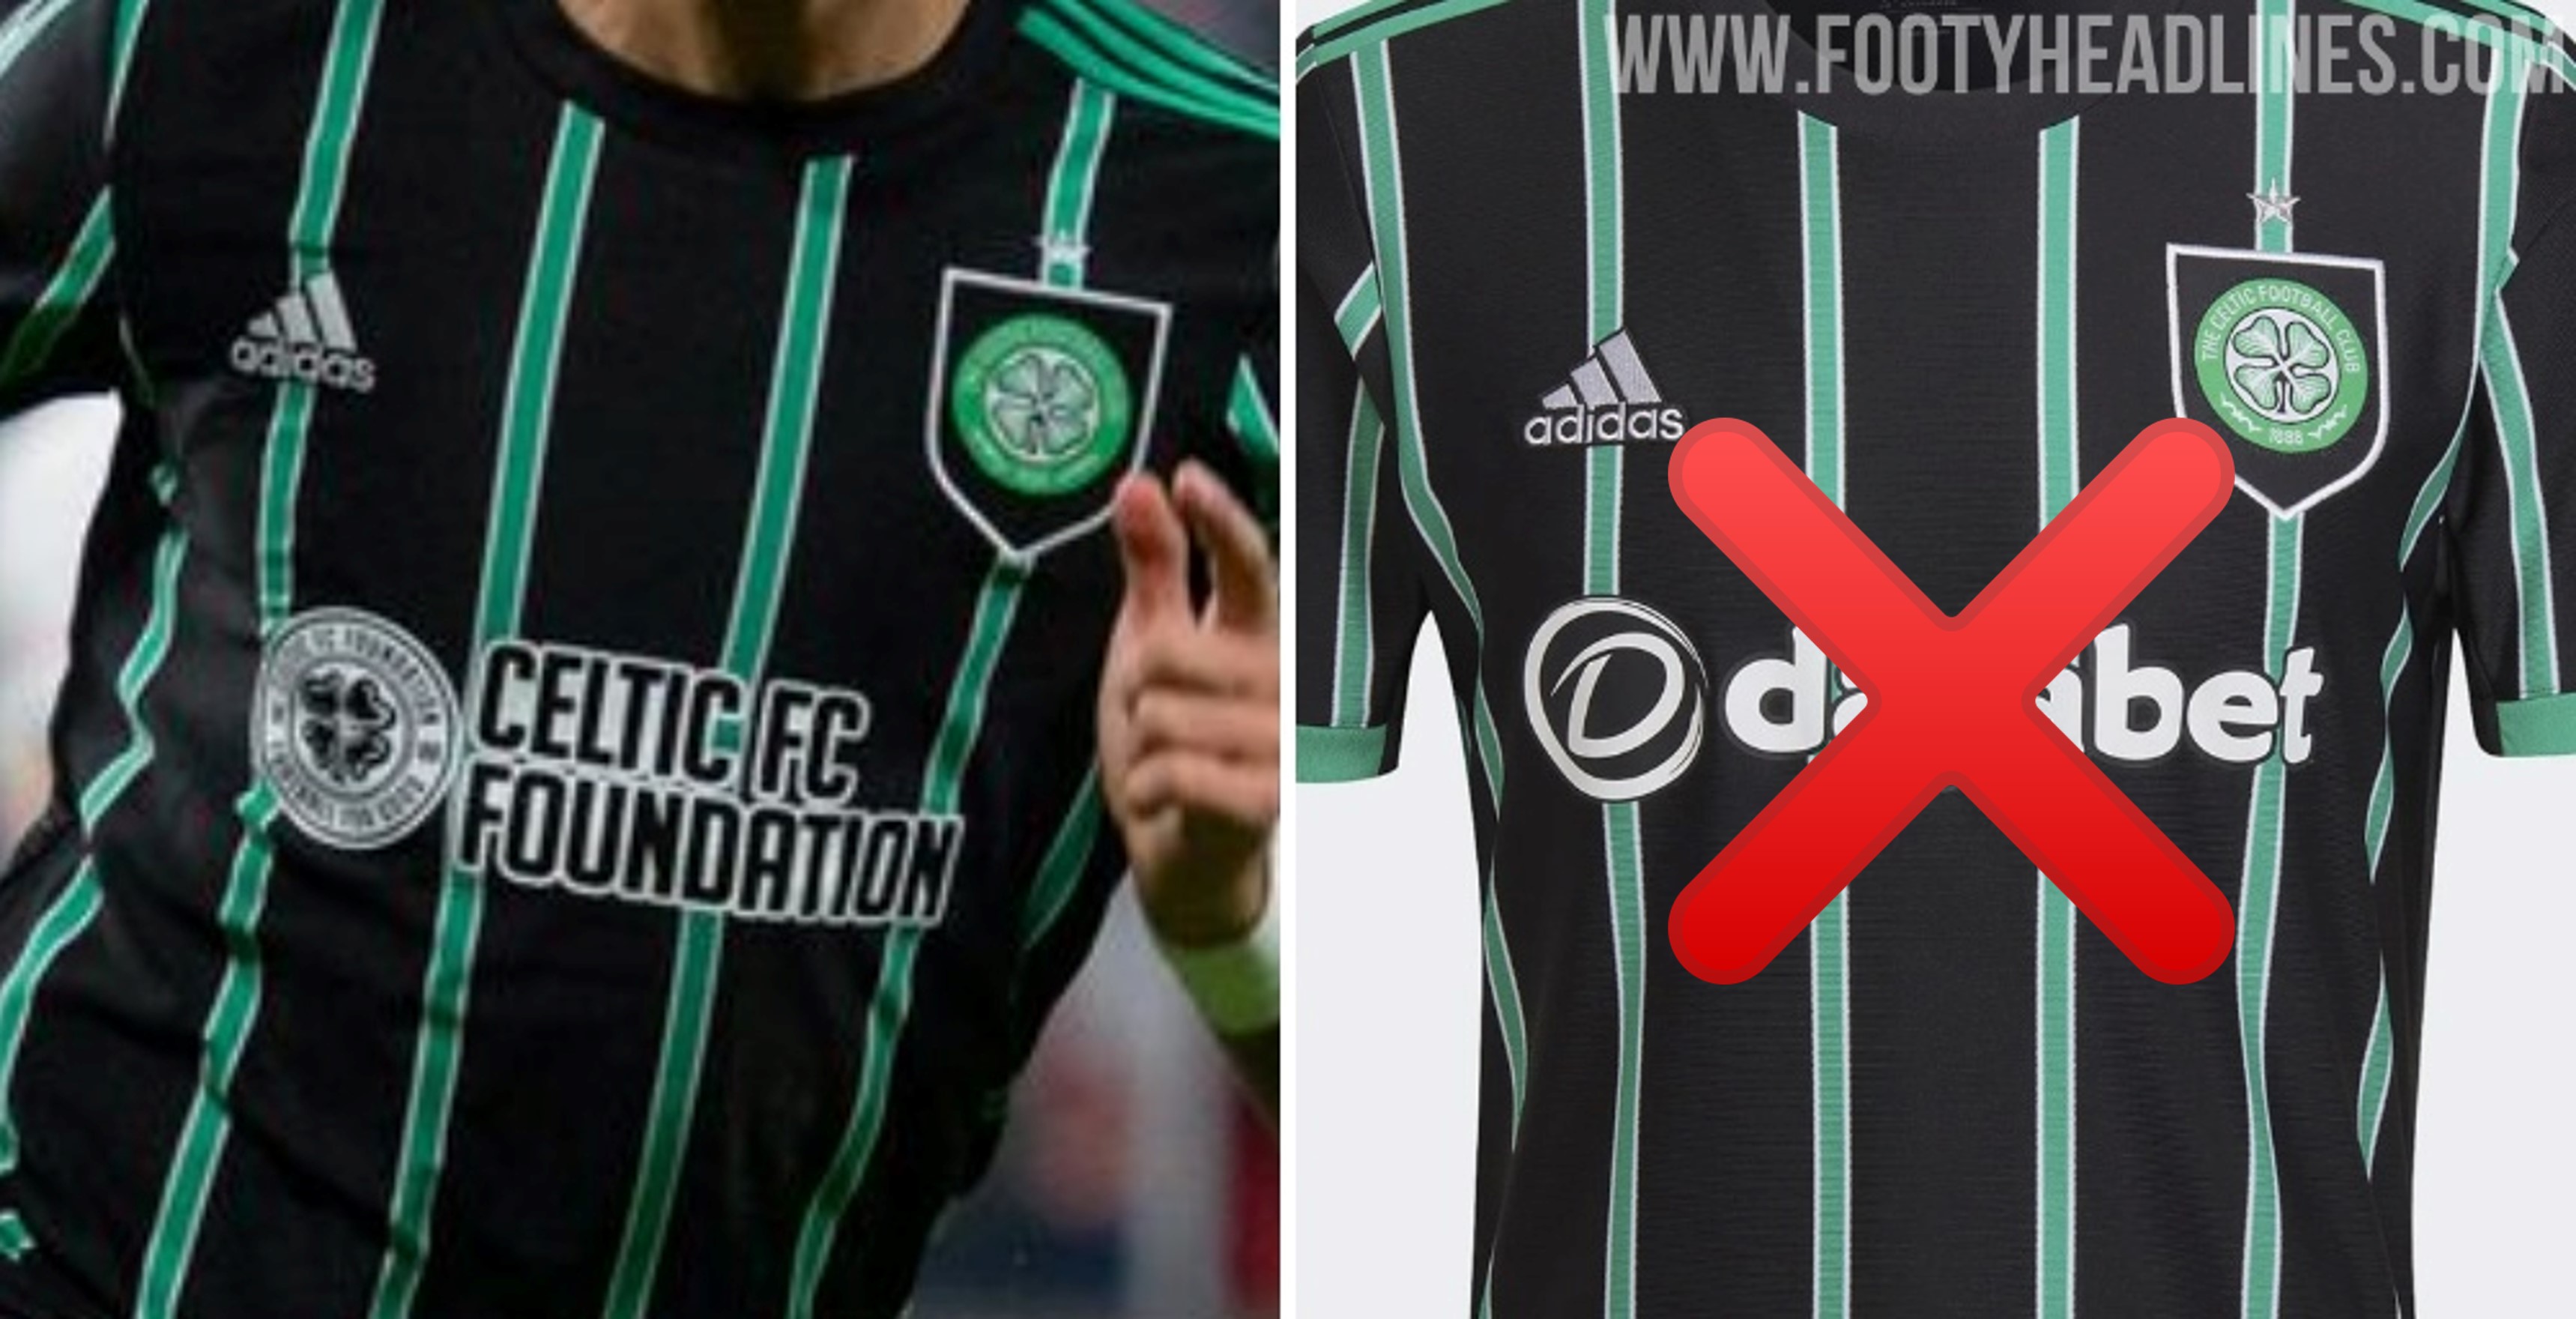 Japan Football - The new Celtic FC 2022/23 home kit is here